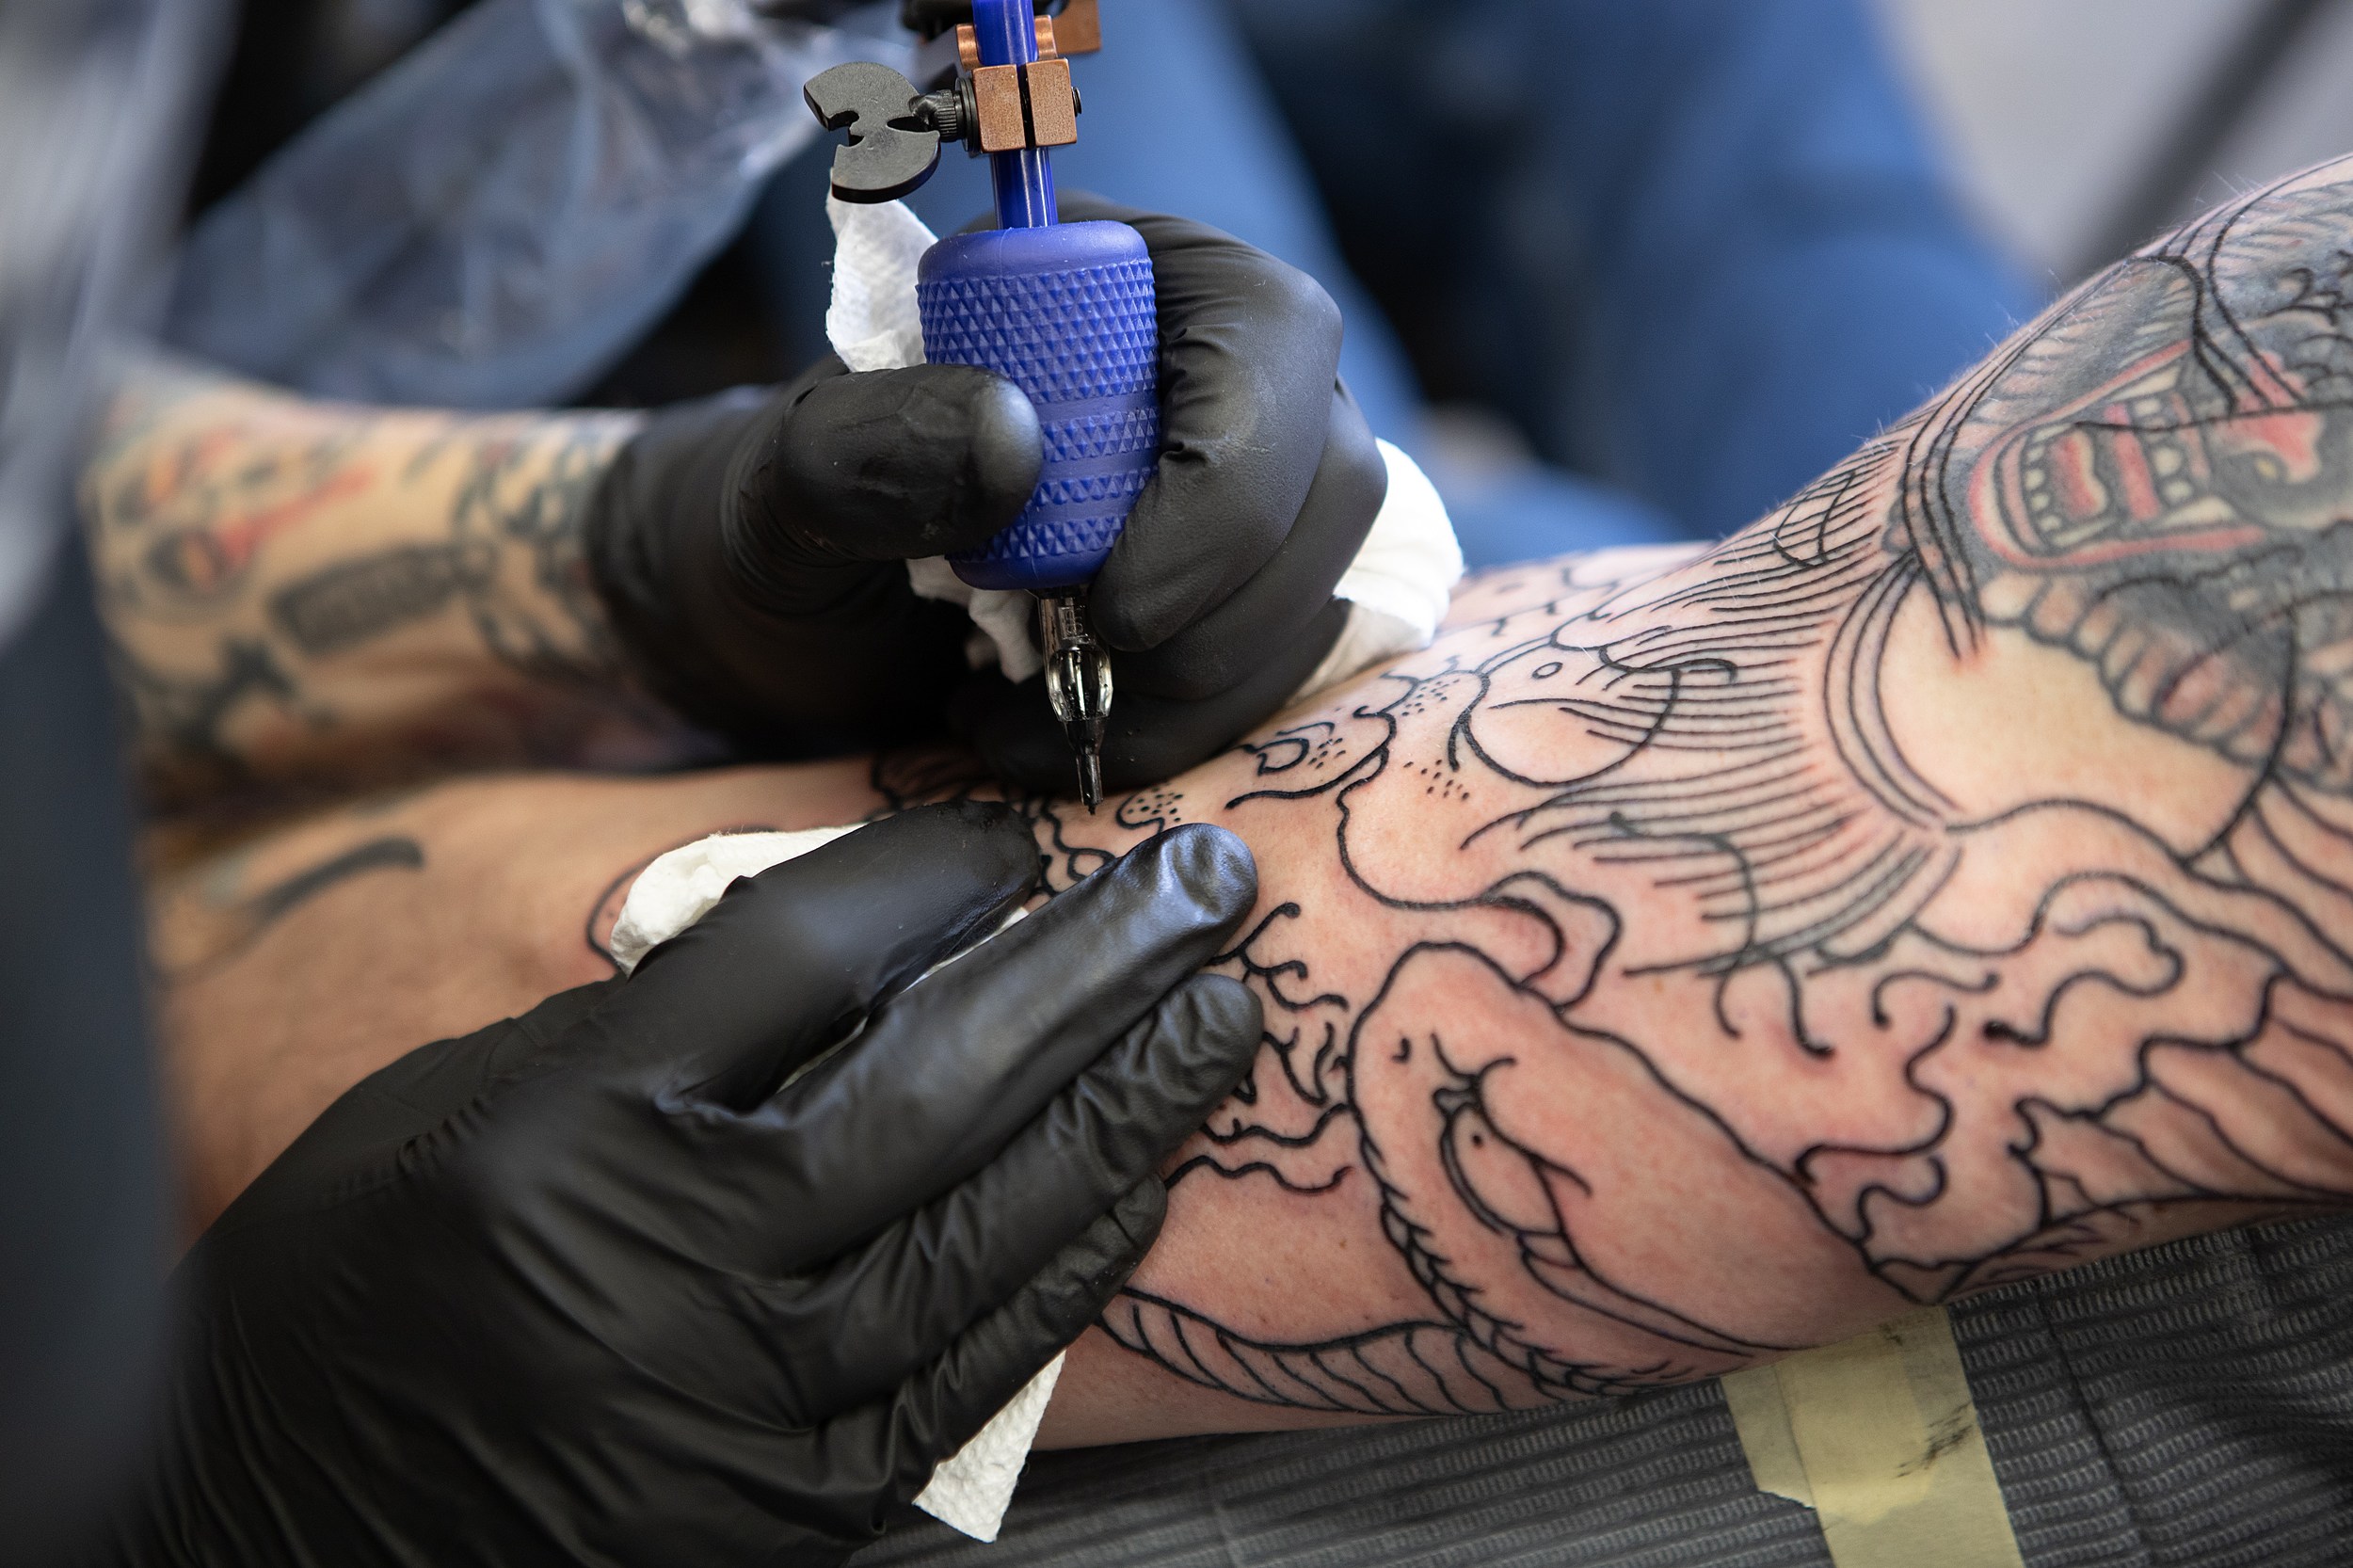 The 10 Best Tattoo Shops in Newark NJ with Free Quotes